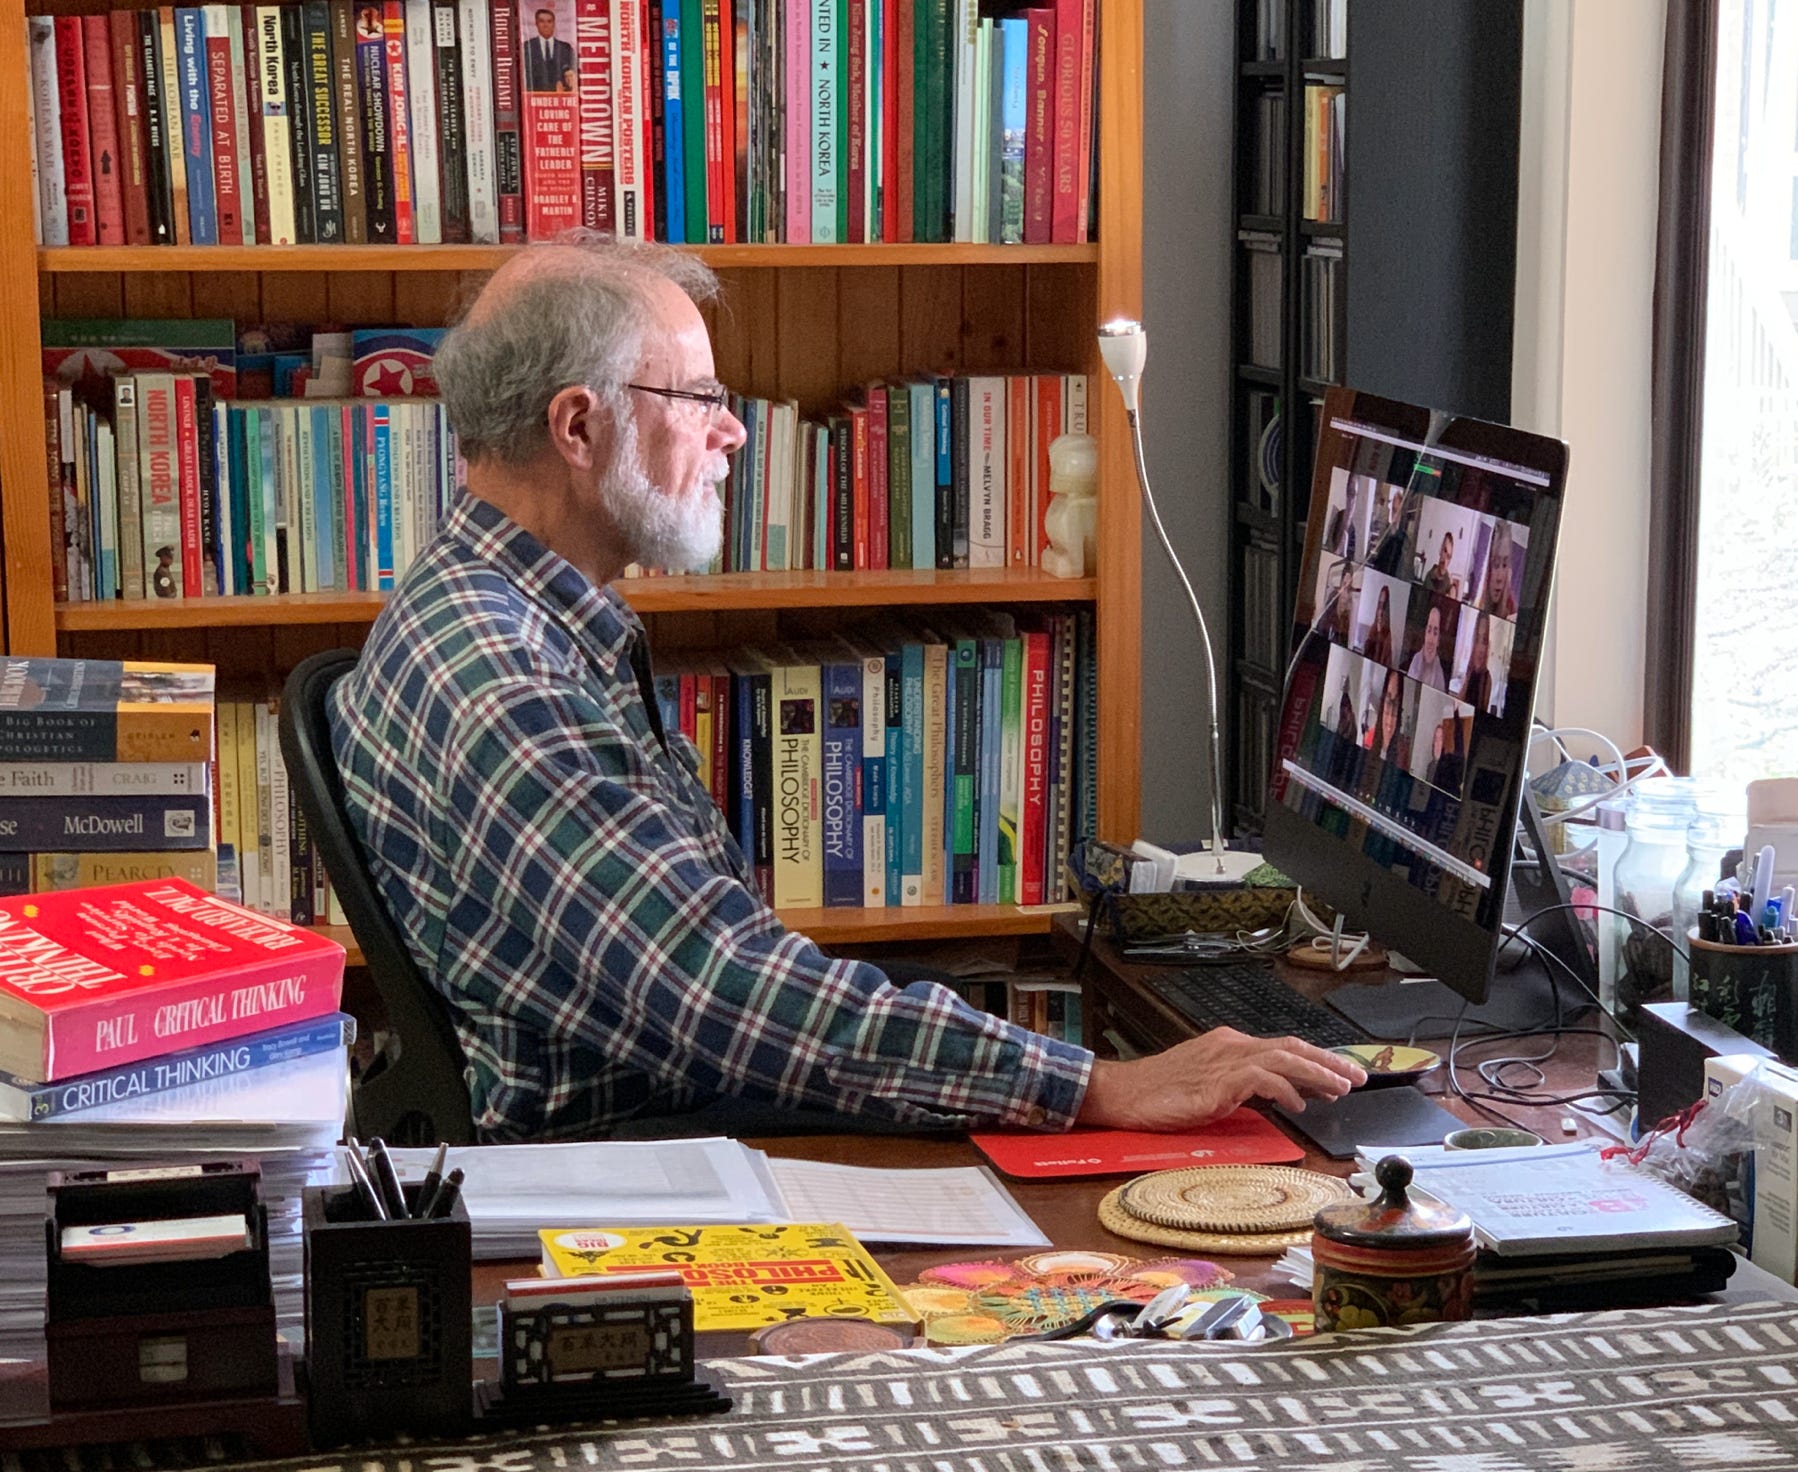 Stephen Codrington teaching a Critical Thinking course online via Zoom from his home office in 2020.